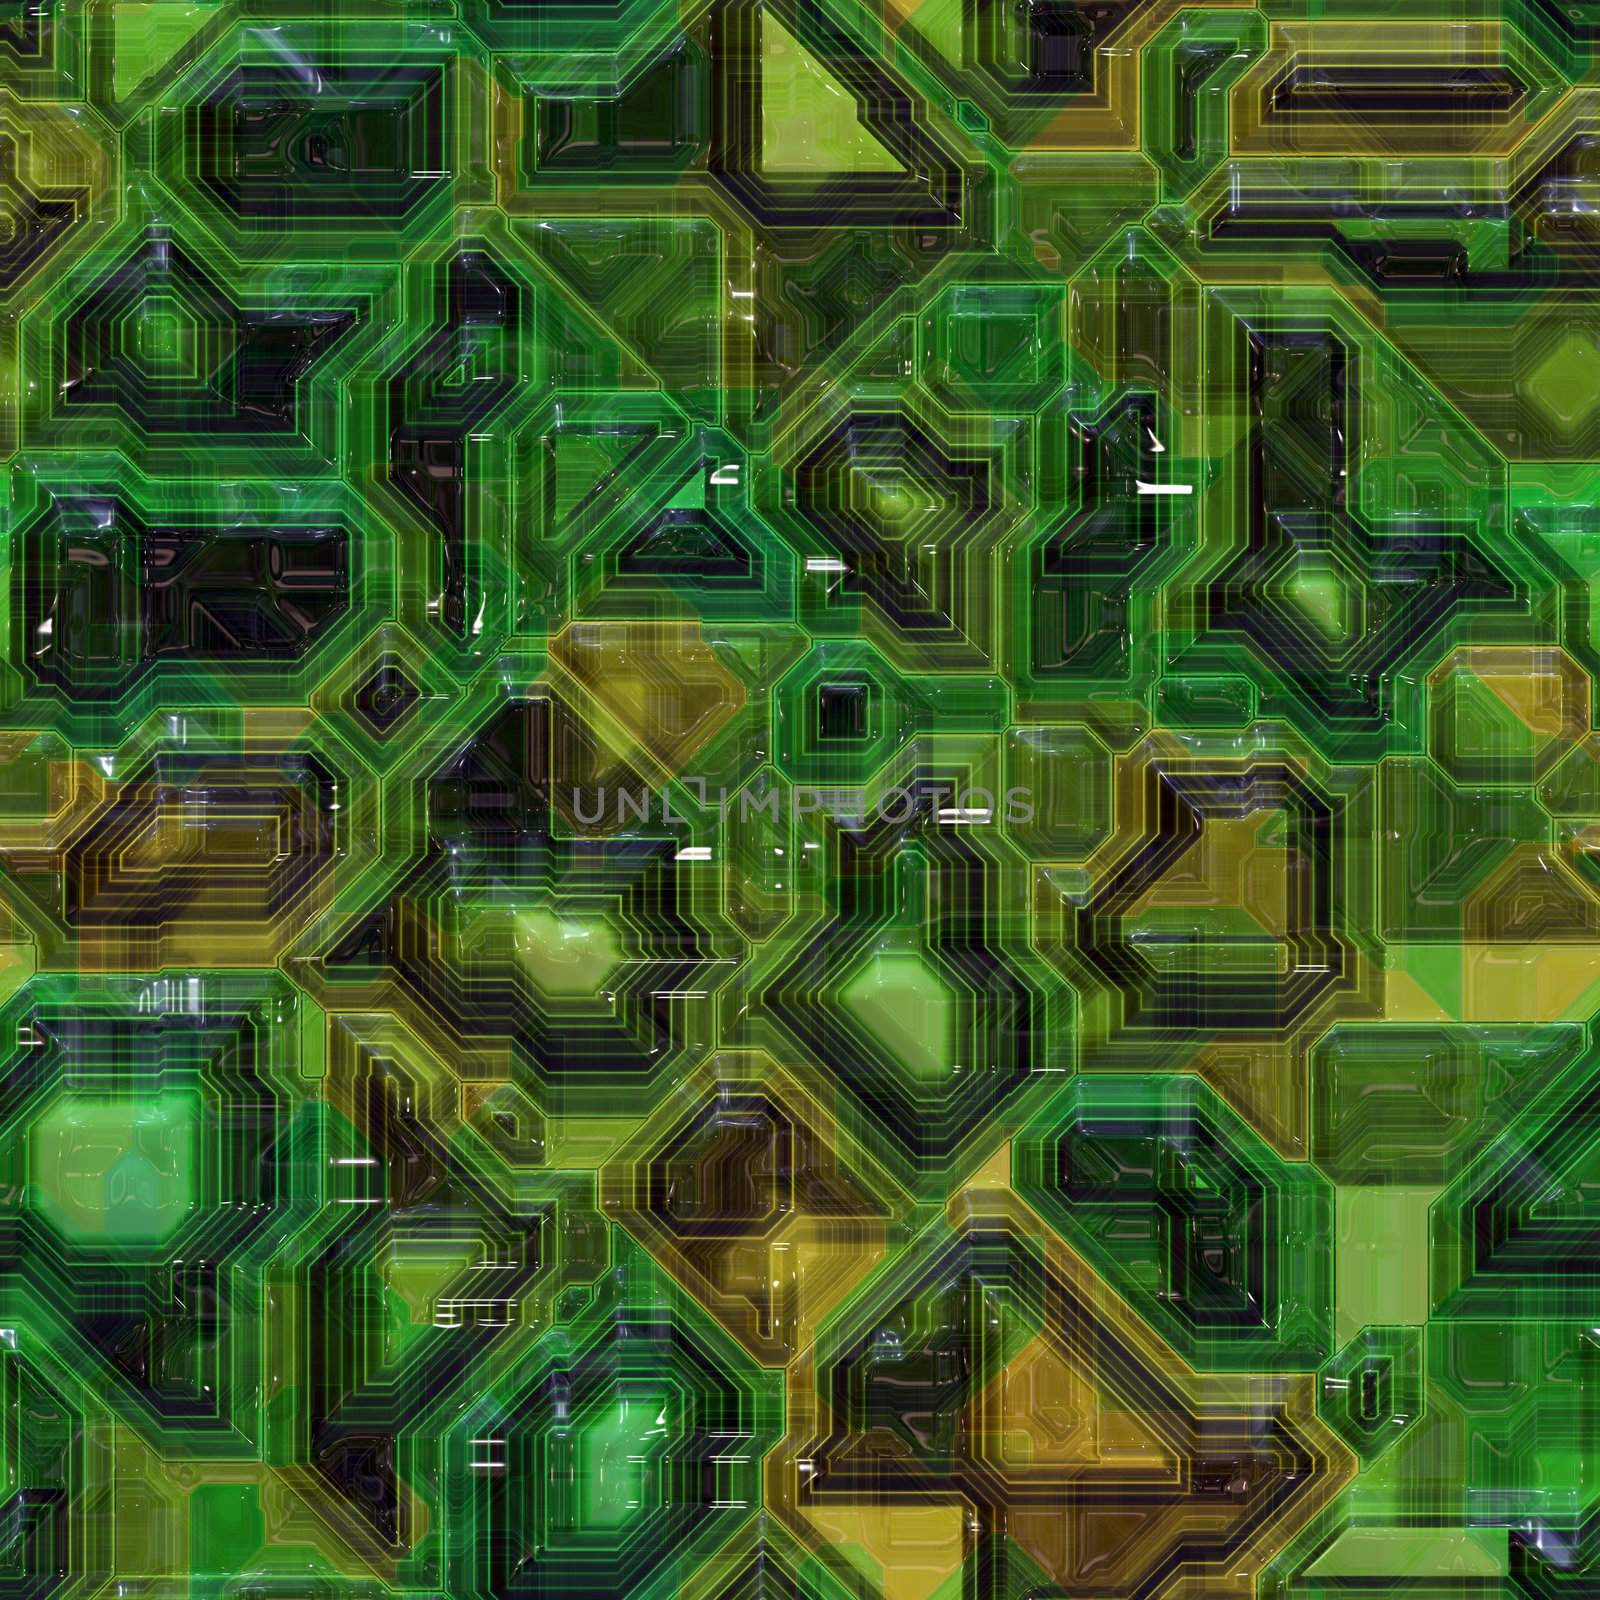 Seamless computer circuity pattern in a green tone.